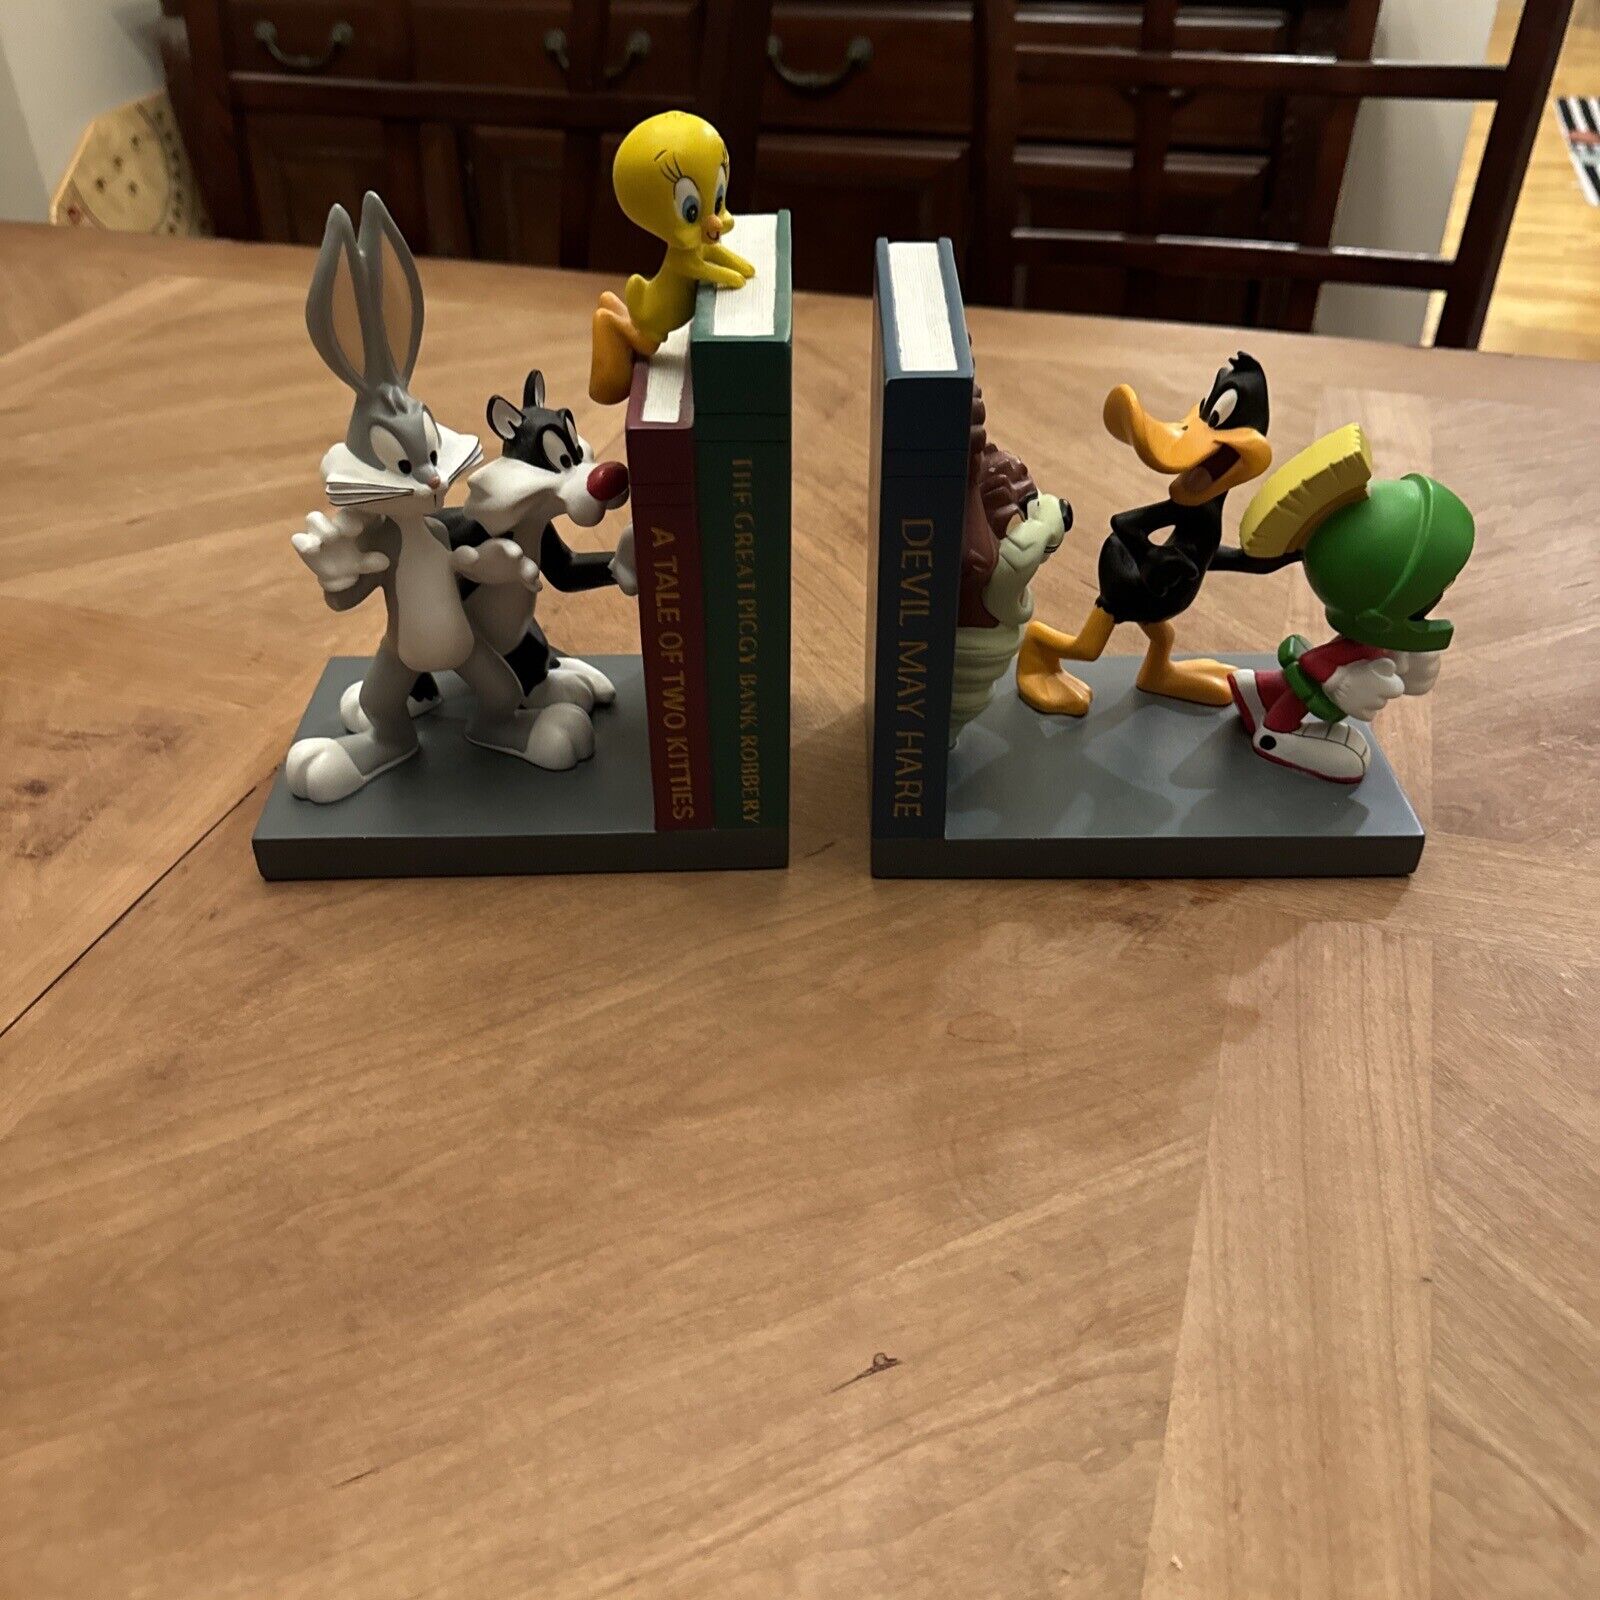 WB Looney Tunes Bookends - 1999 Vintage - Bugs Bunny, Taz, Tweety, Daffy Duck